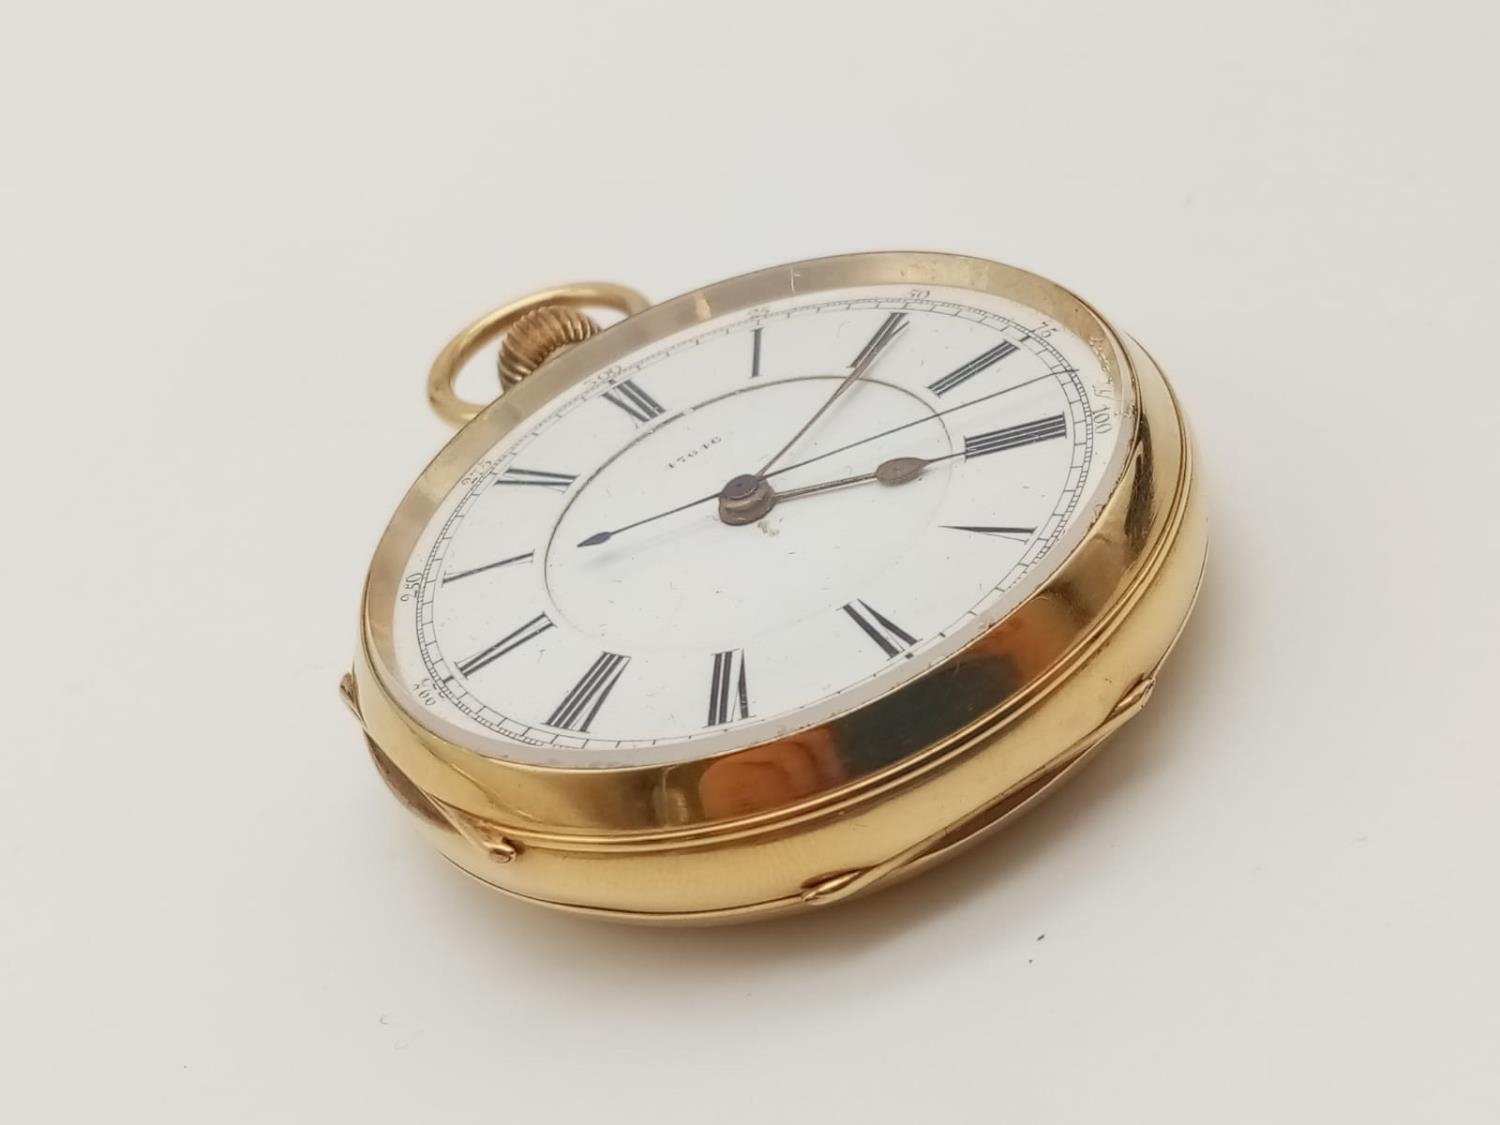 AN 18K GOLD POCKET WATCH WITH UNUSUAL HALL MARKING OF SHEFFIELD AND CHESTER 1953, IN VERY NICE - Image 4 of 12